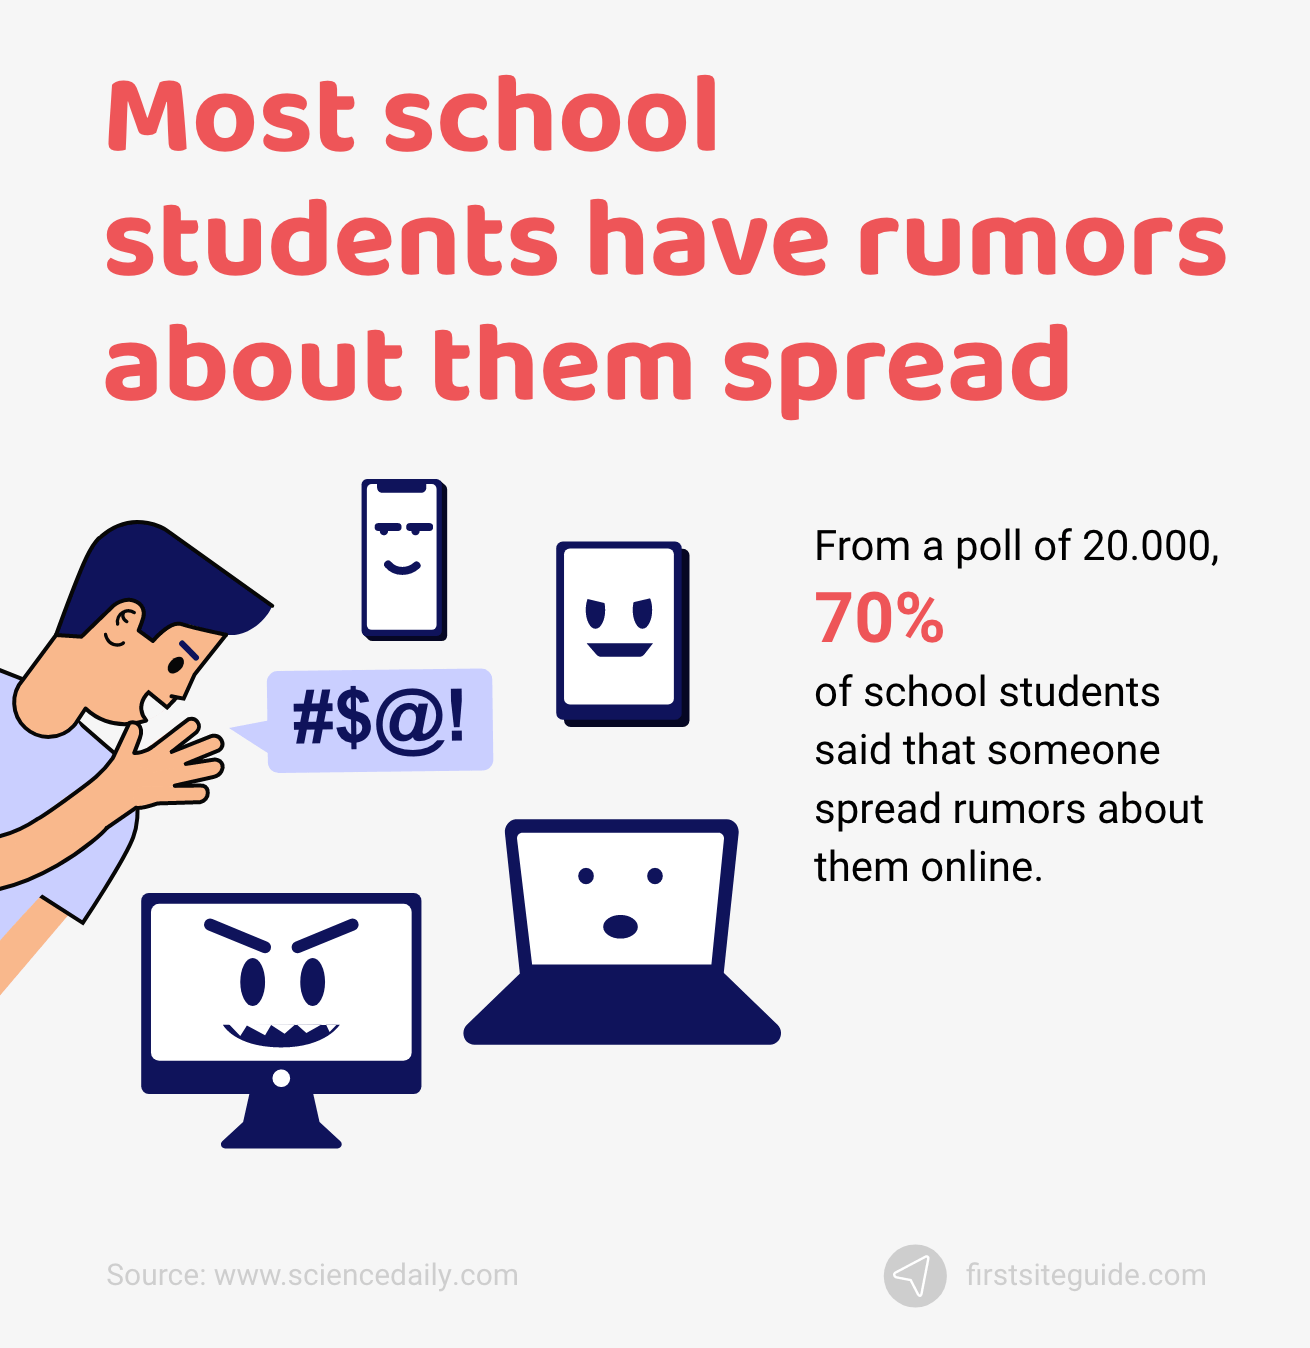 Most school students have rumors about them spread online